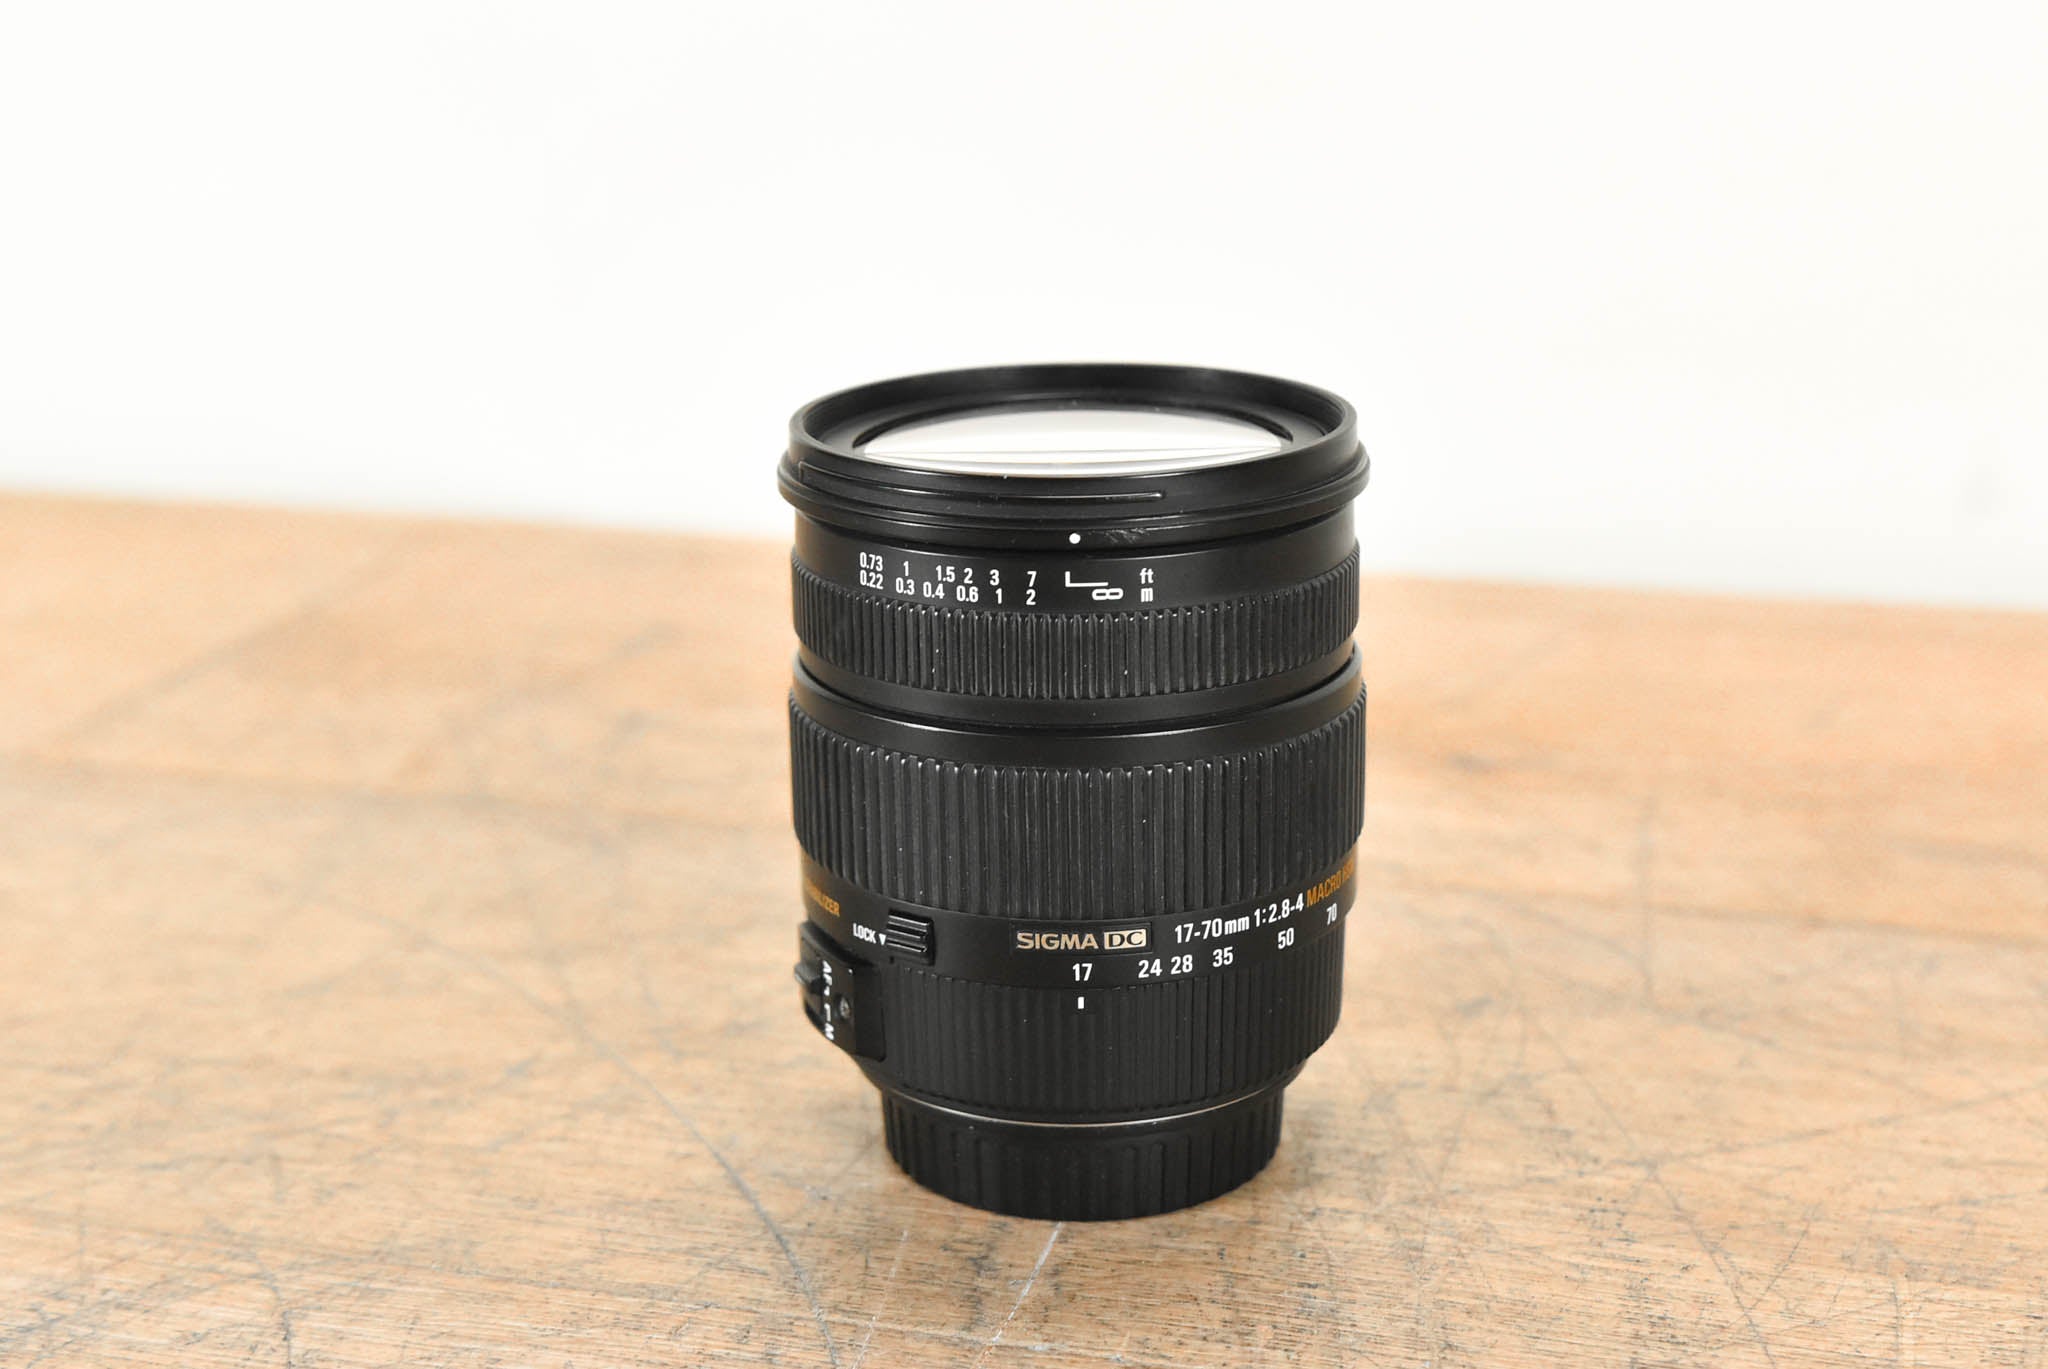 Sigma 17-70mm f/2.8-4 DC Macro OS for Canon EF